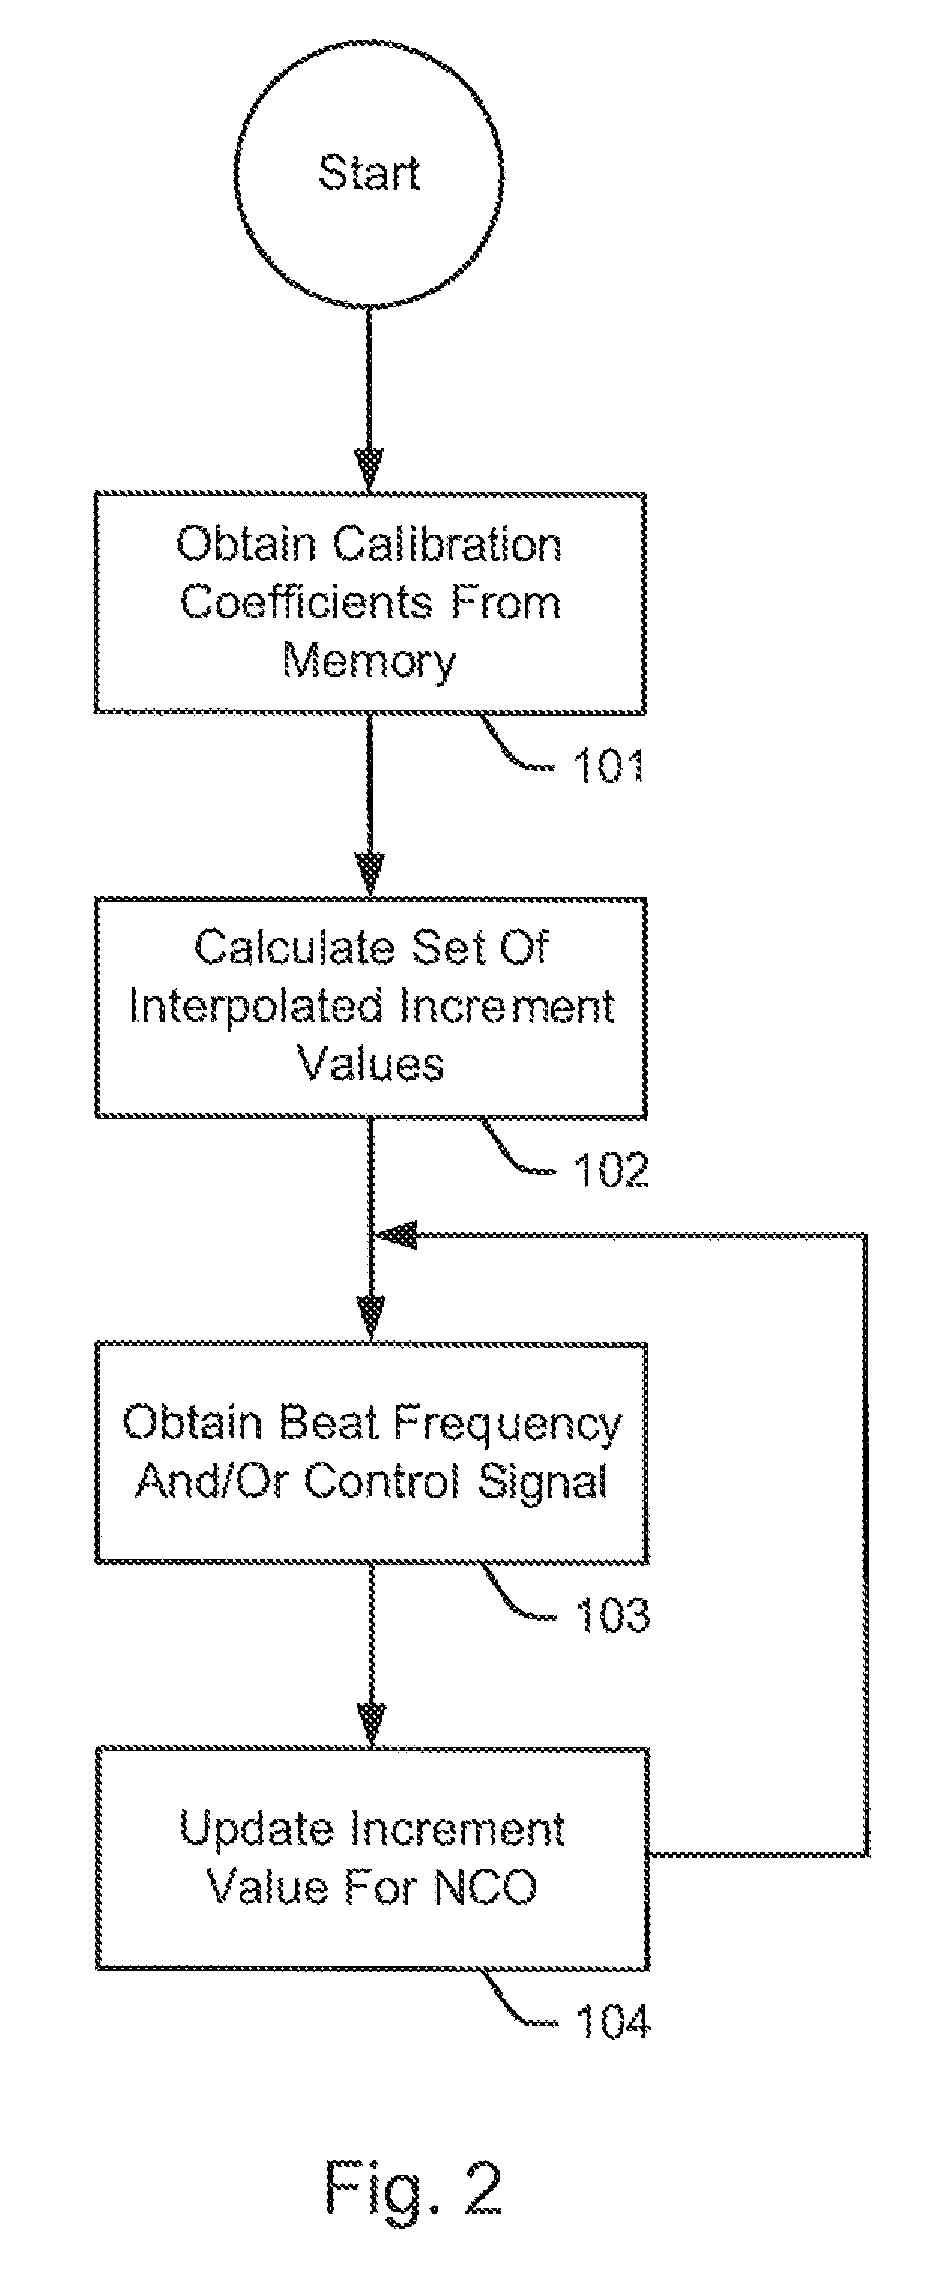 Crystal reference clock and radio localization receiver